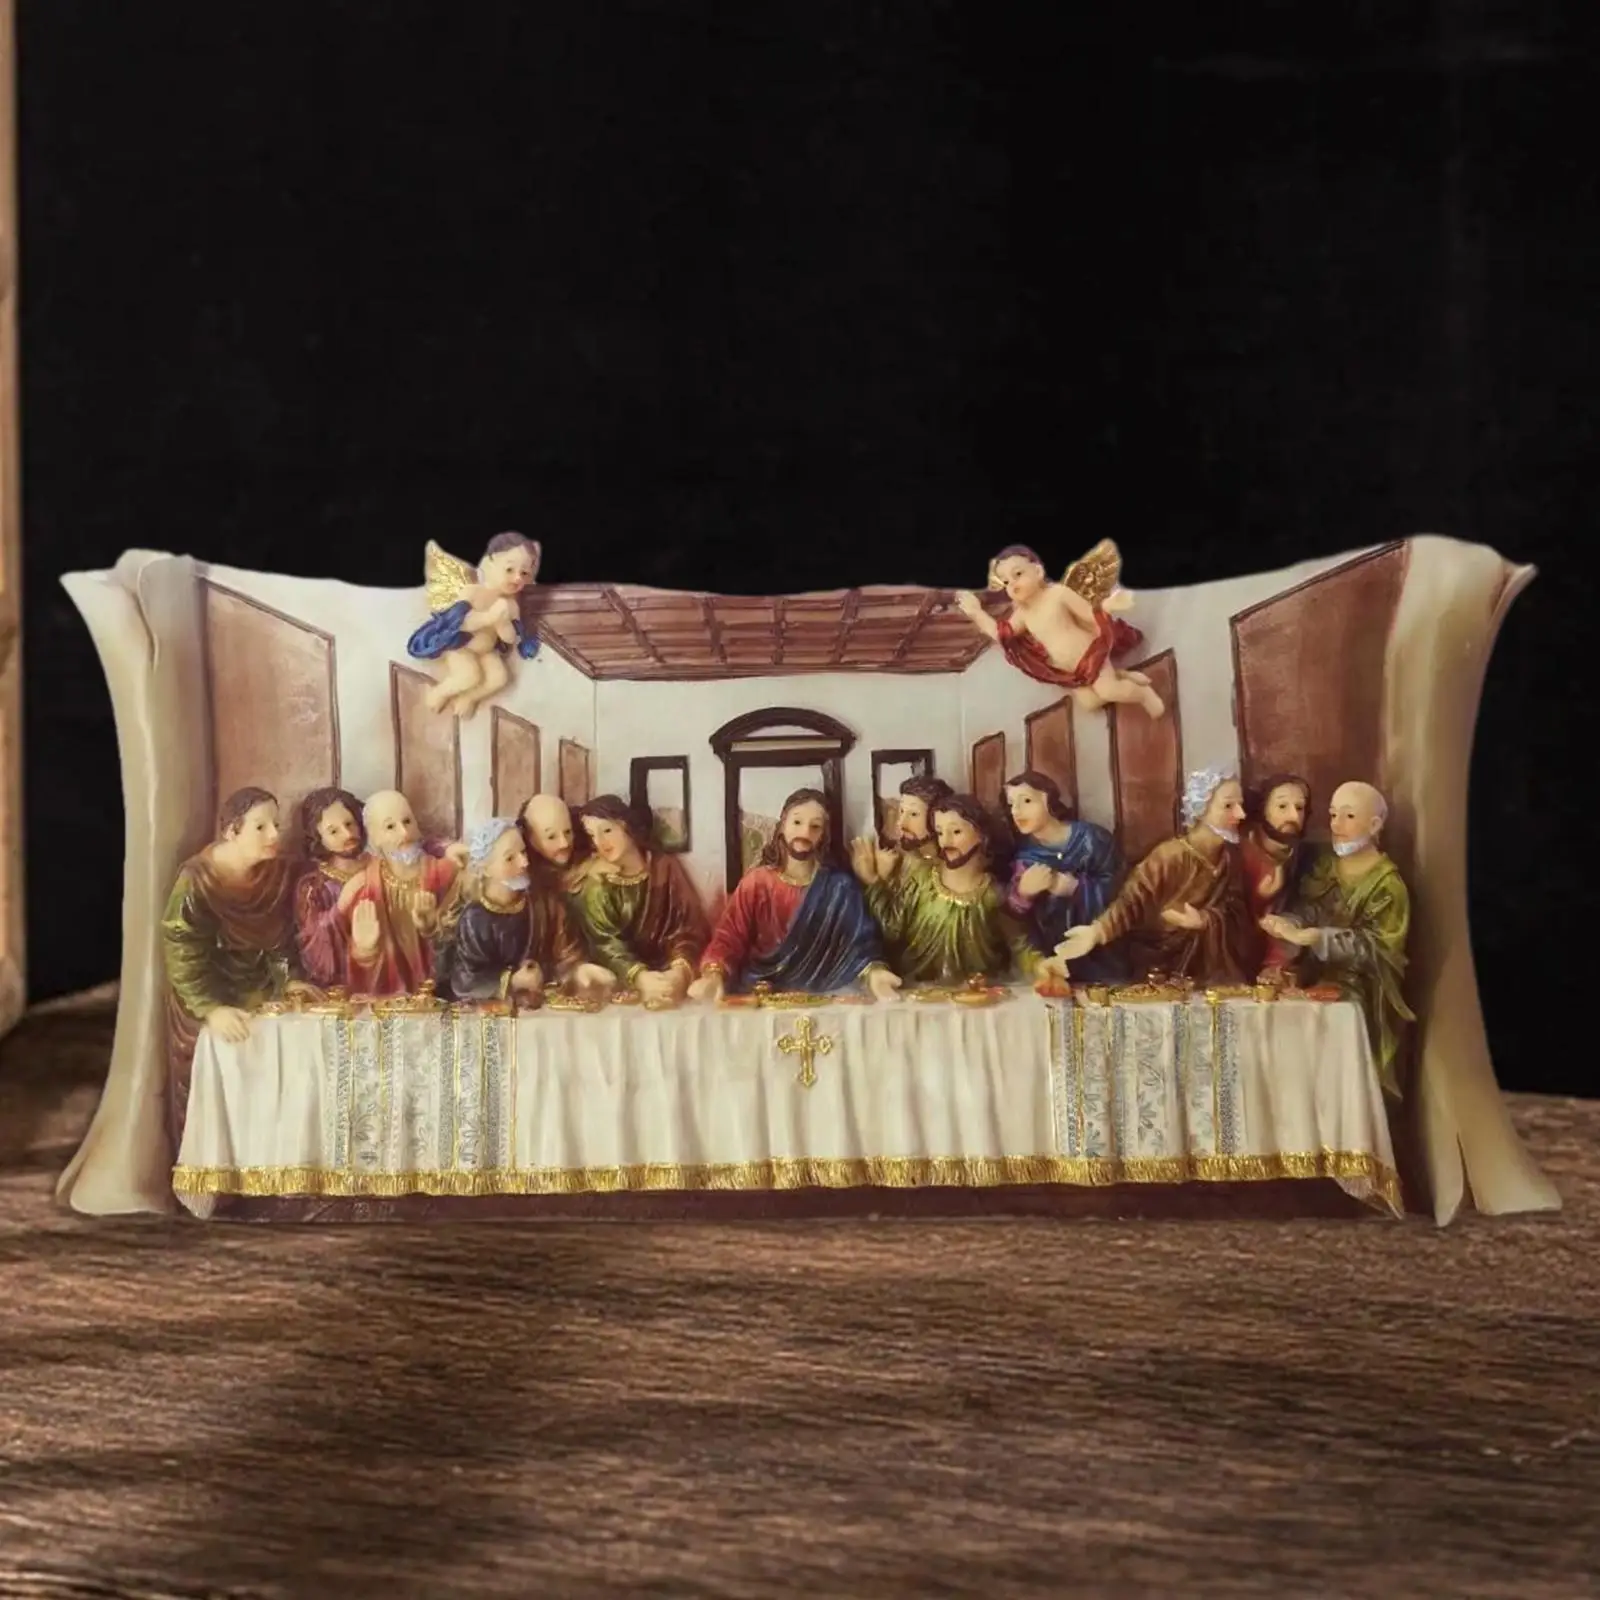 Last Supper Figures Christian Catholic Figurine Religious Statue Sculpture for Home Bedroom Religious Gift Ornaments Decoration